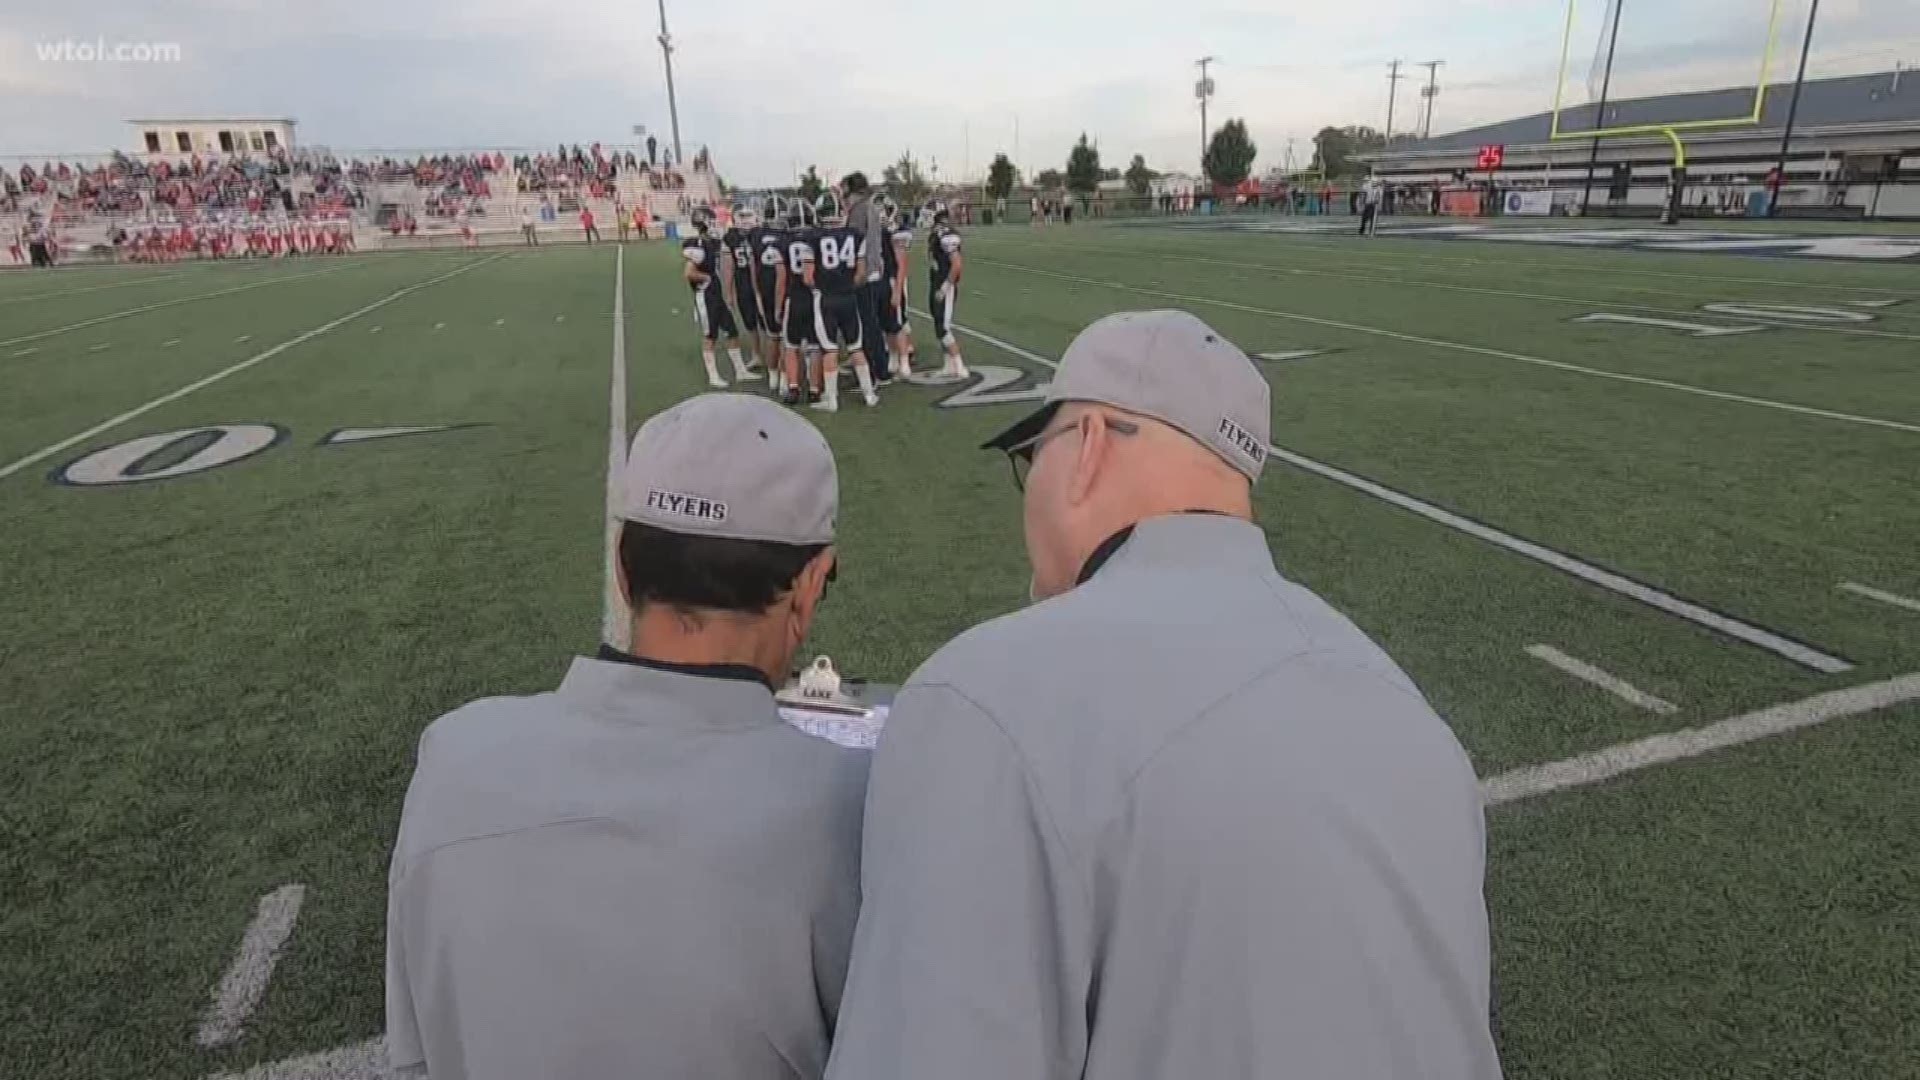 Scott and Bob have been statisticians for Lake High School's Varsity football team for the past 25 years, their bond is just as unique as how they keep stats.